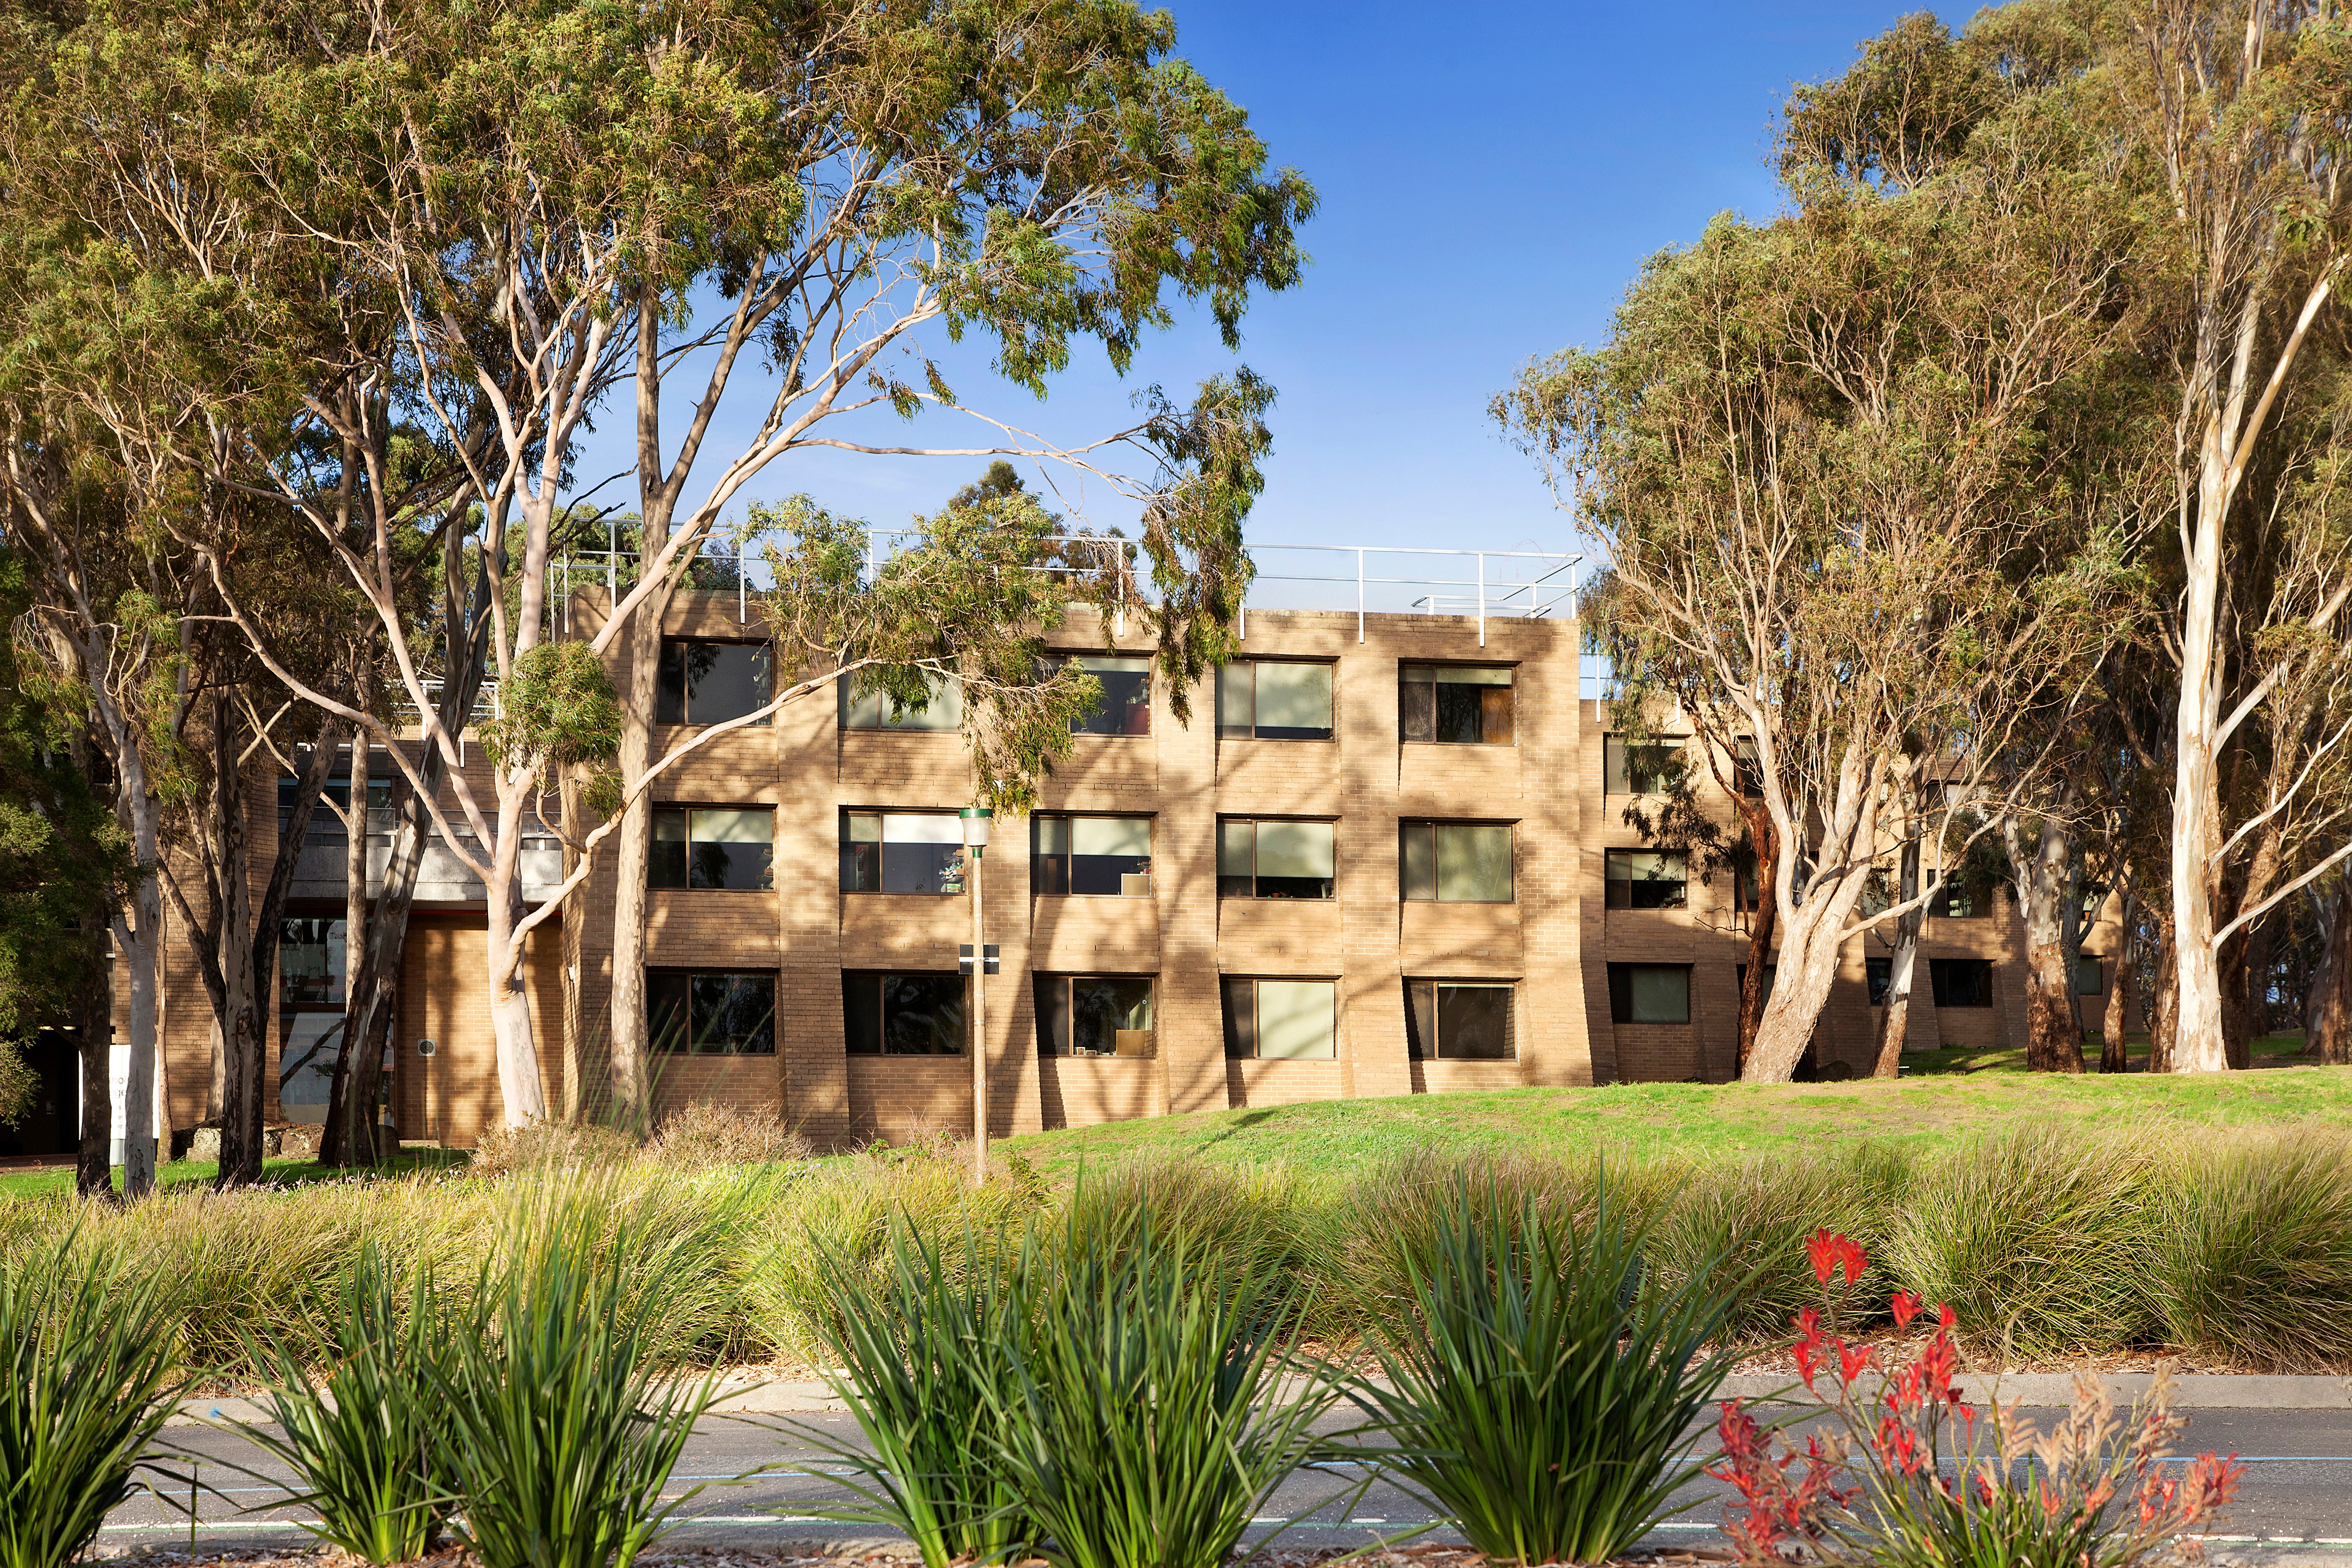 Native gardwn landscape, tall gum trees and exterior shot of Chisholm College.